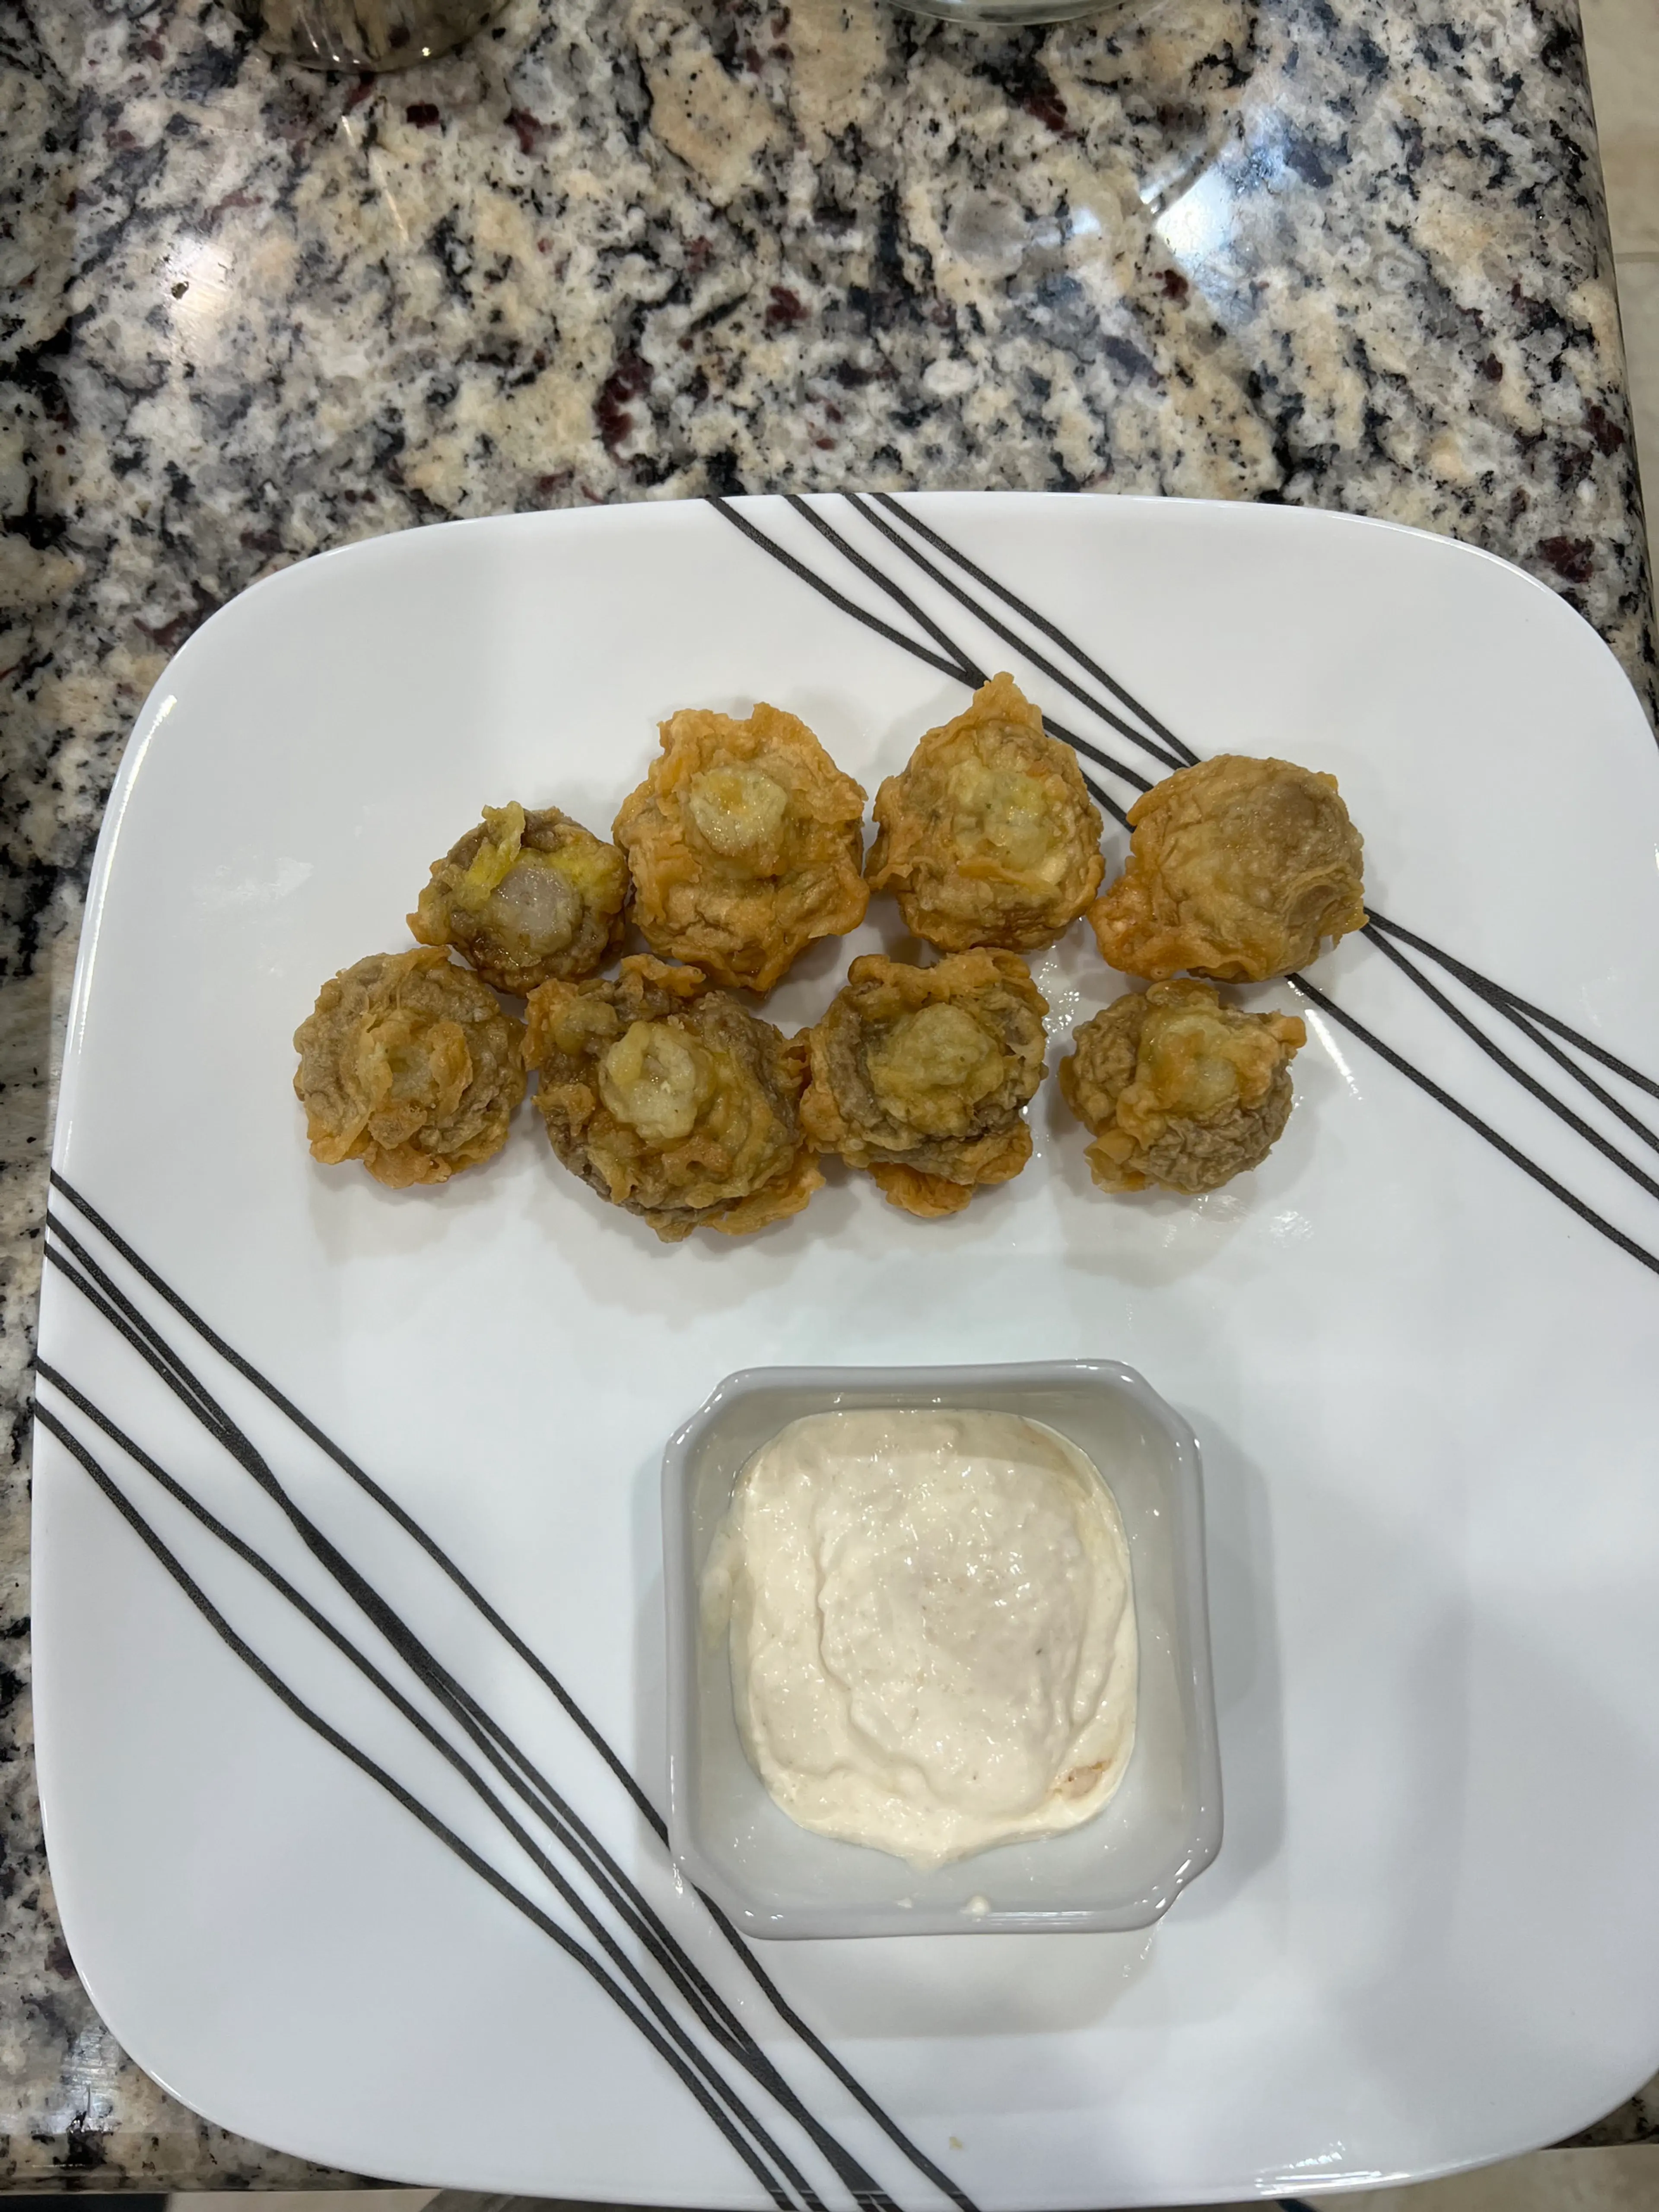 Fried Mushrooms And Dipping Sauce